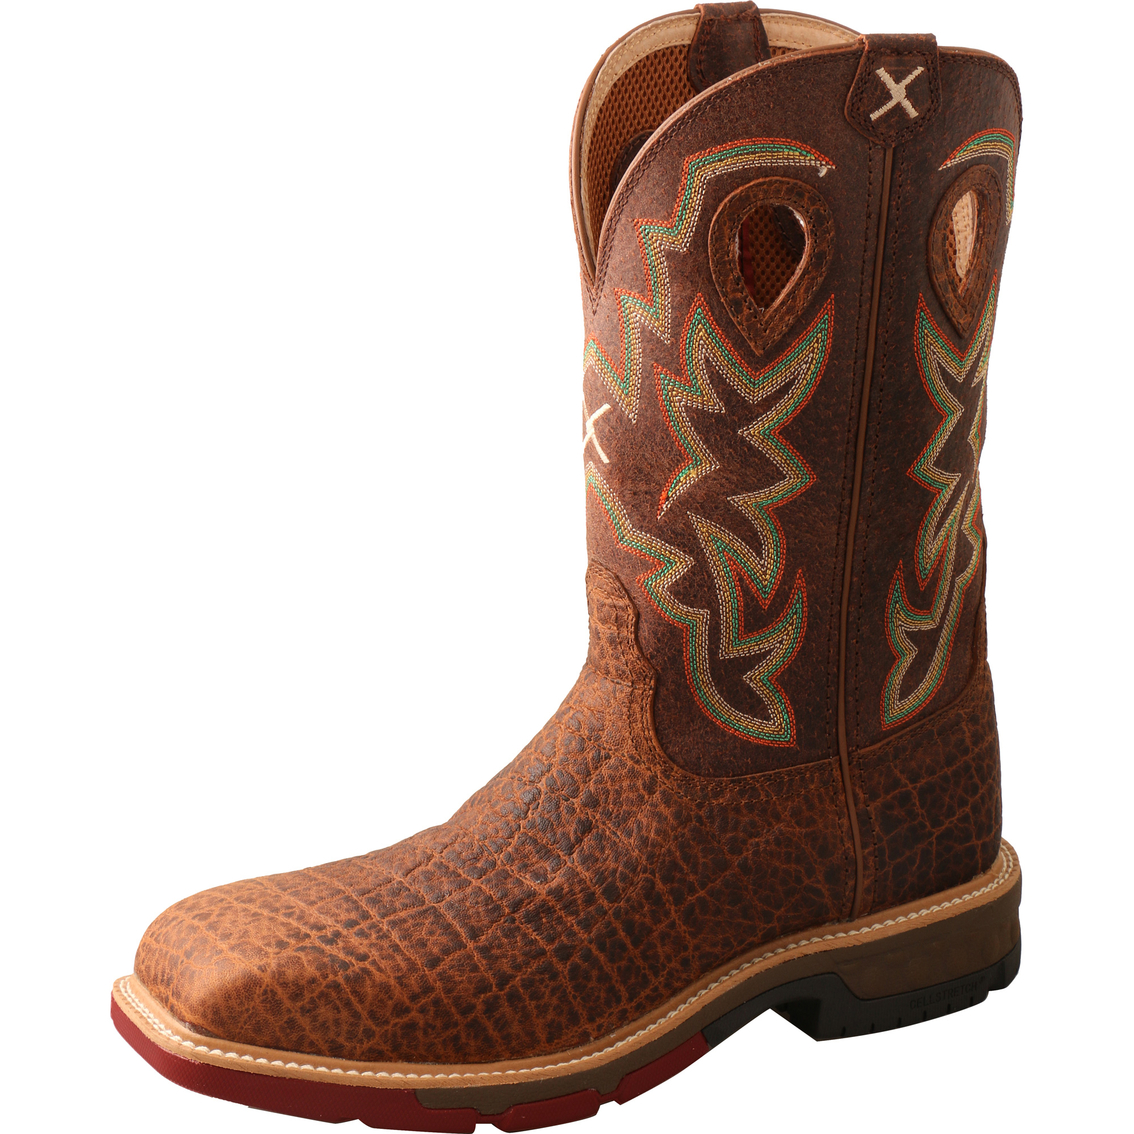 Twisted X Men's 12 in. Nano Composite Safety Toe Western Work Boots - Image 2 of 7